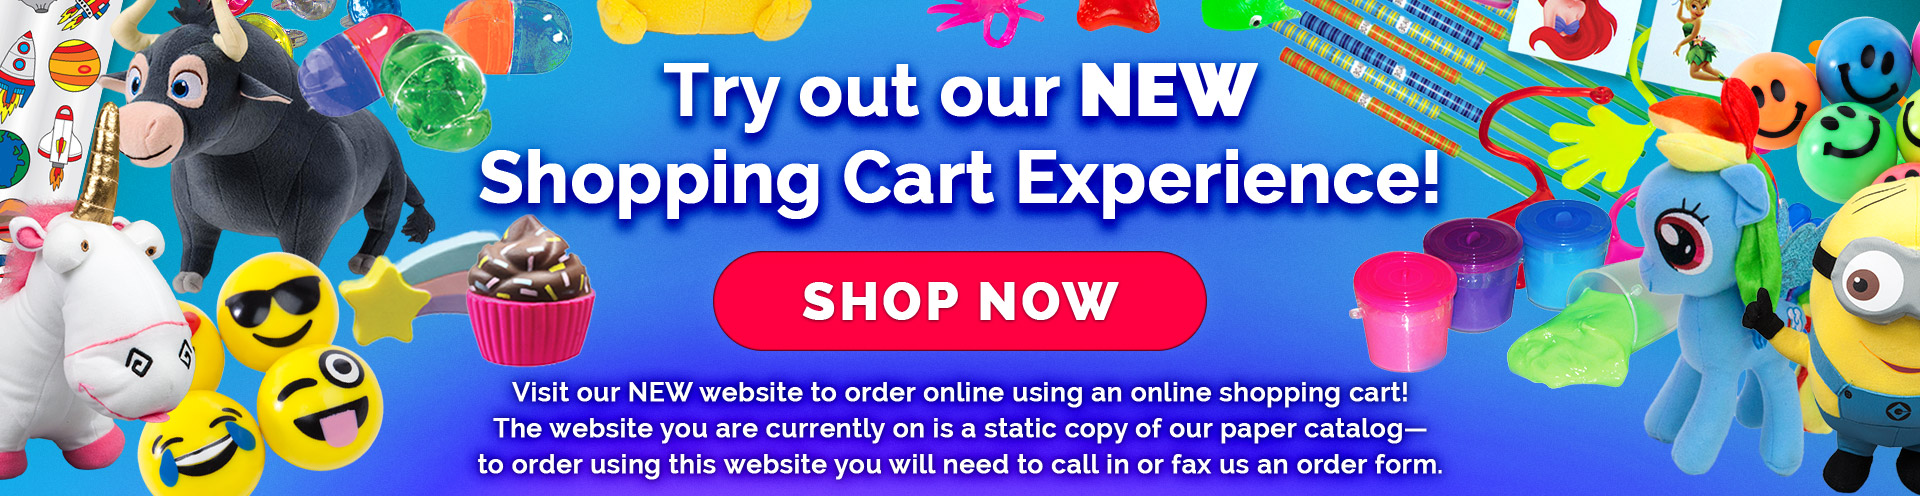 Try out our NEW Shopping Cart Experience!